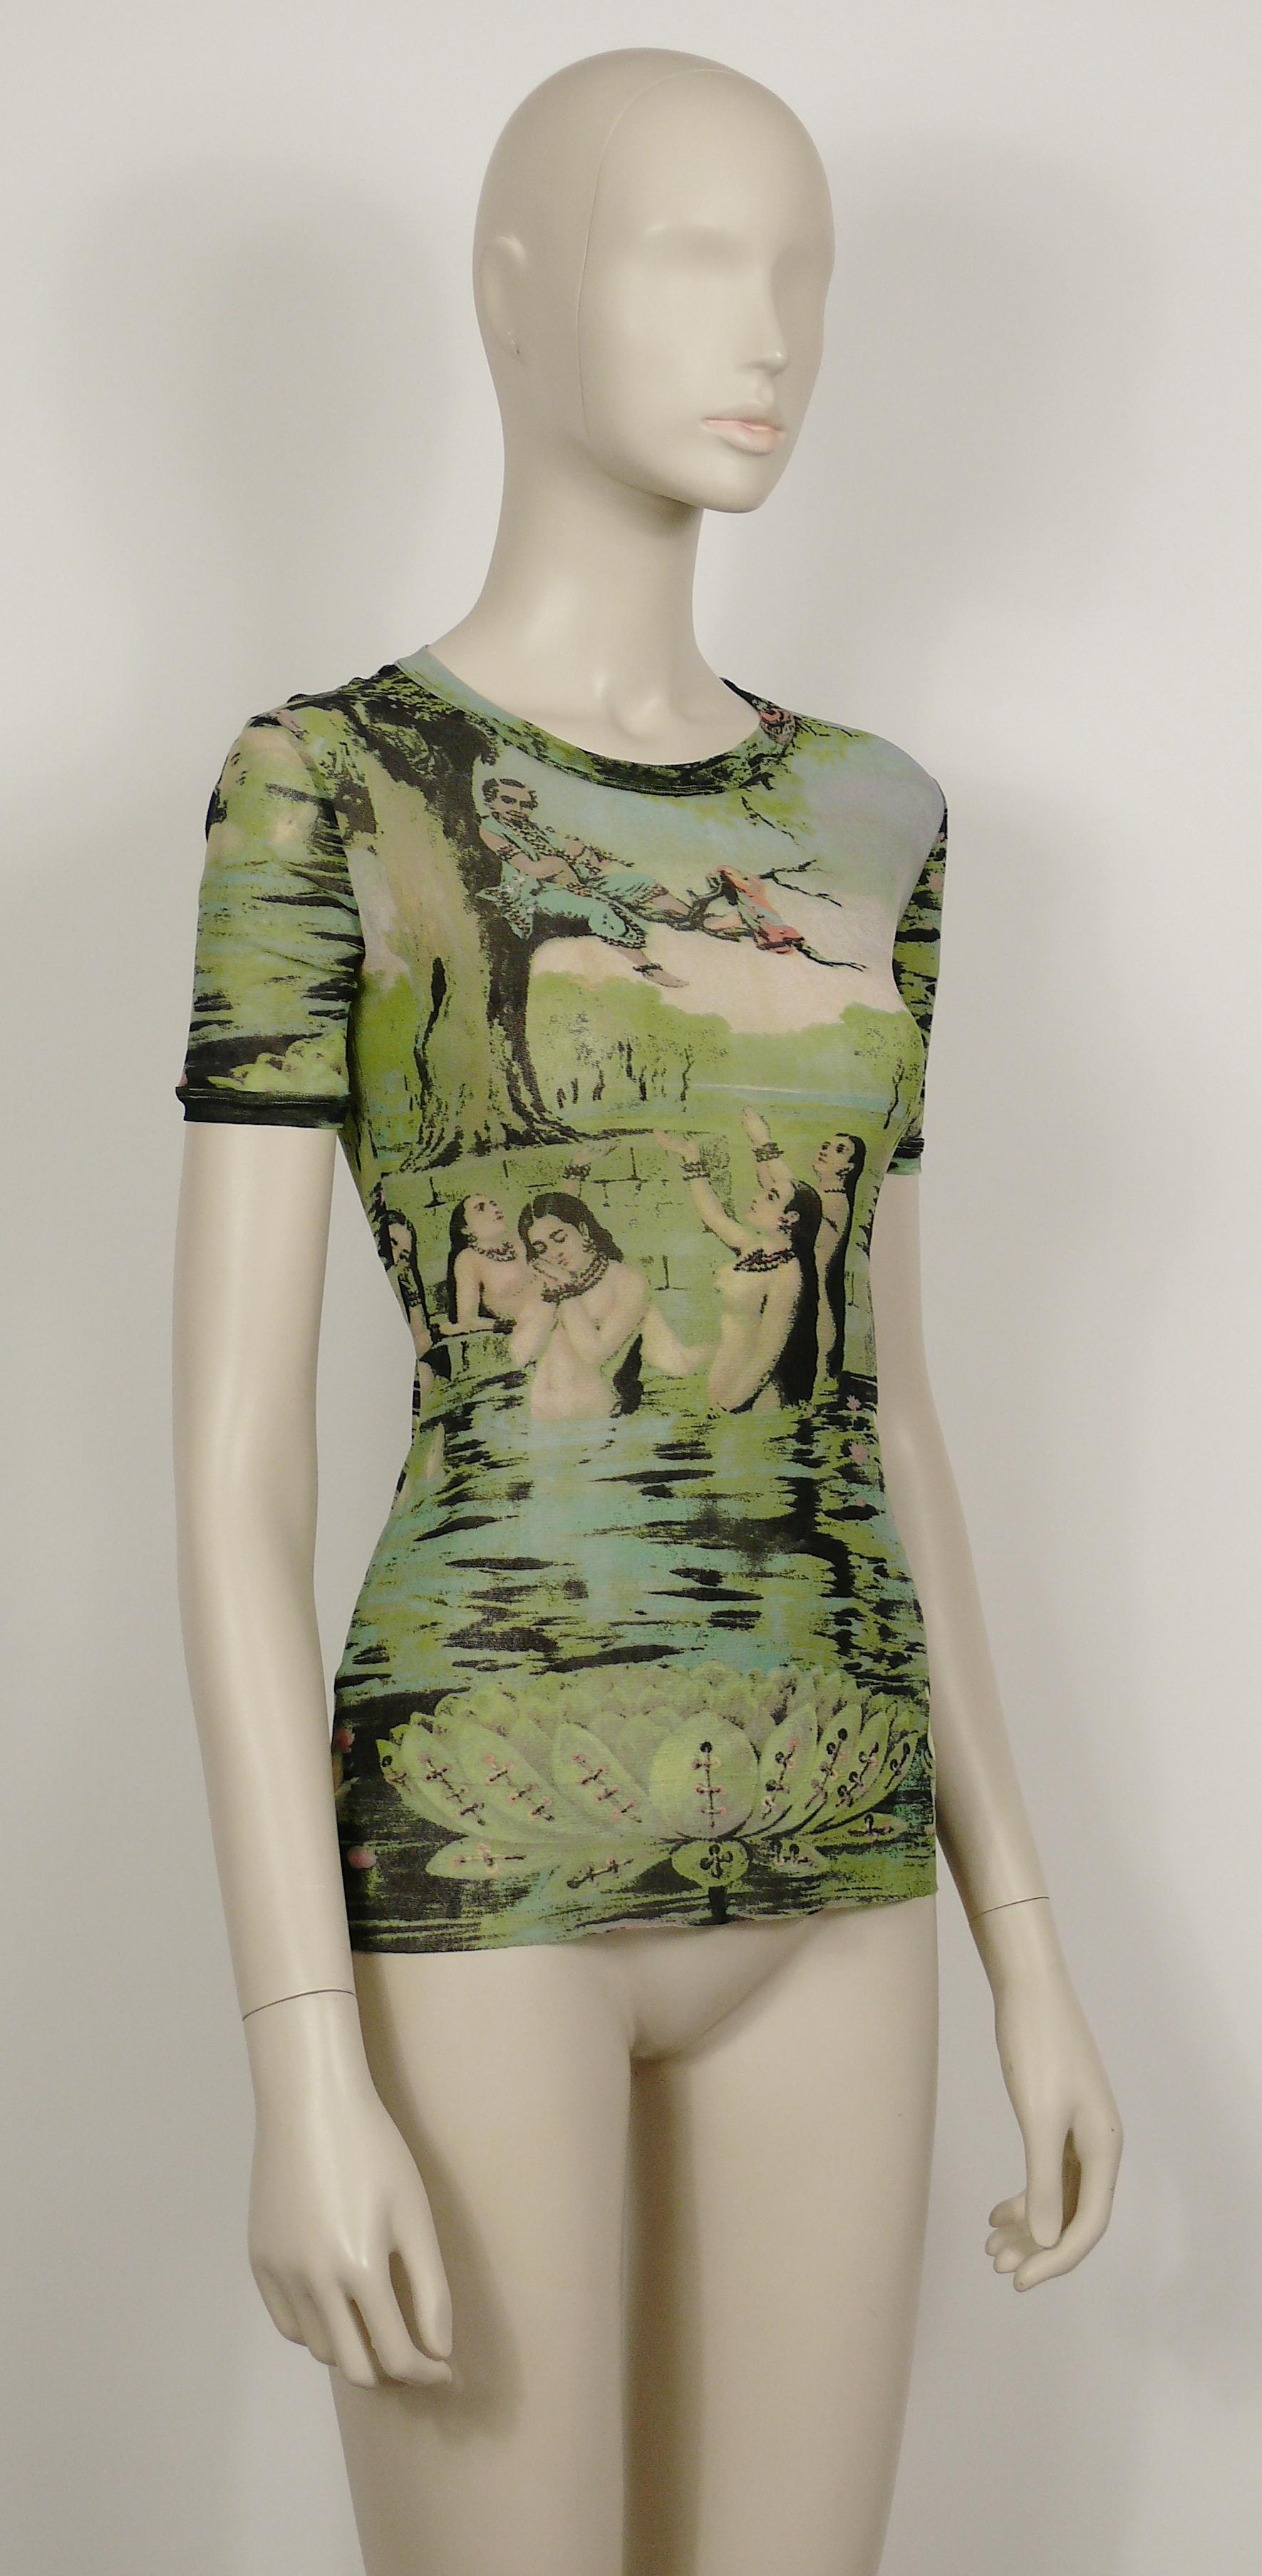 JEAN PAUL GAULTIER vintage sheer FUZZI mesh short sleeve t-shirt featuring a gorgeous Oriental Bath scene print.

Label reads JEAN PAUL GAULTIER MAILLE Made in Italy.

Size tag reads : S.
Please refer to measurements.

Composition tag reads : 100%